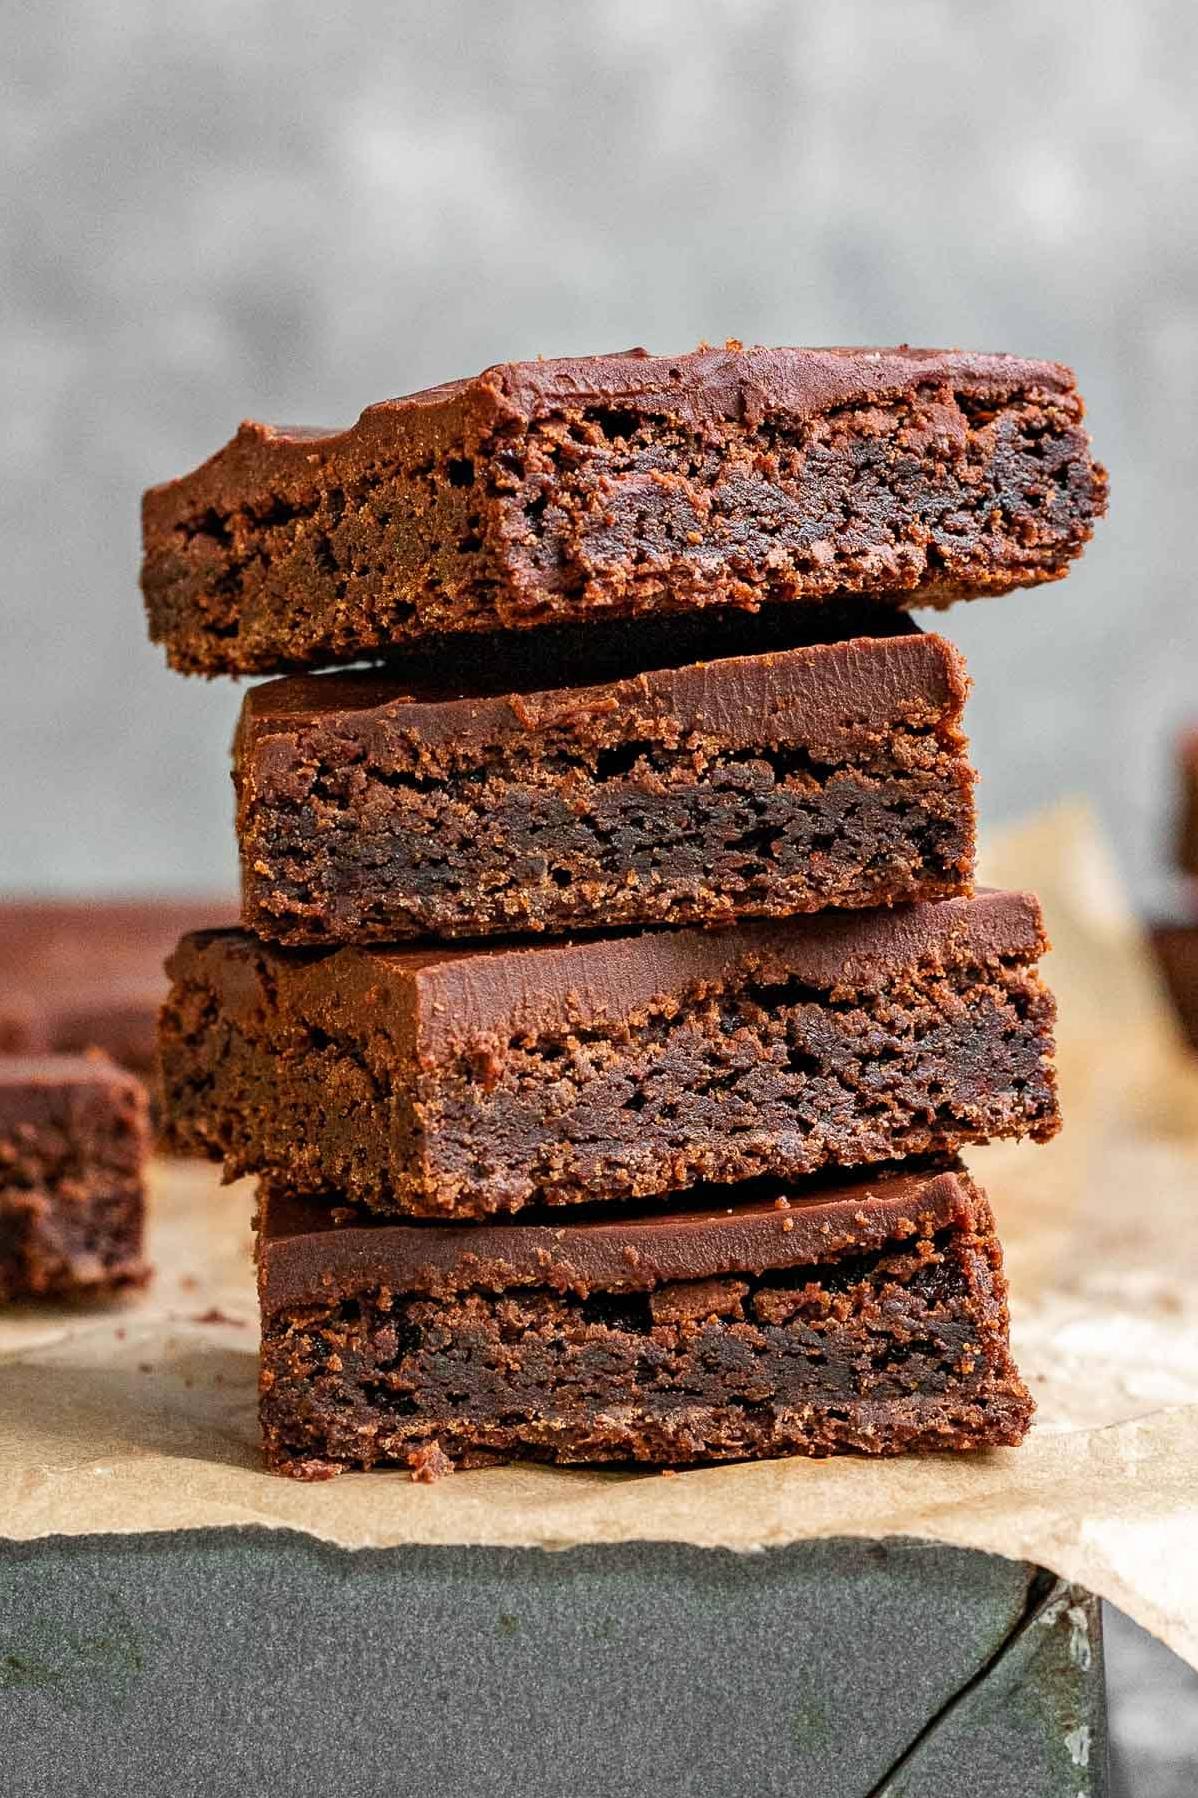  Get ready to indulge in the fudgiest, most decadent brownies you've ever tasted.